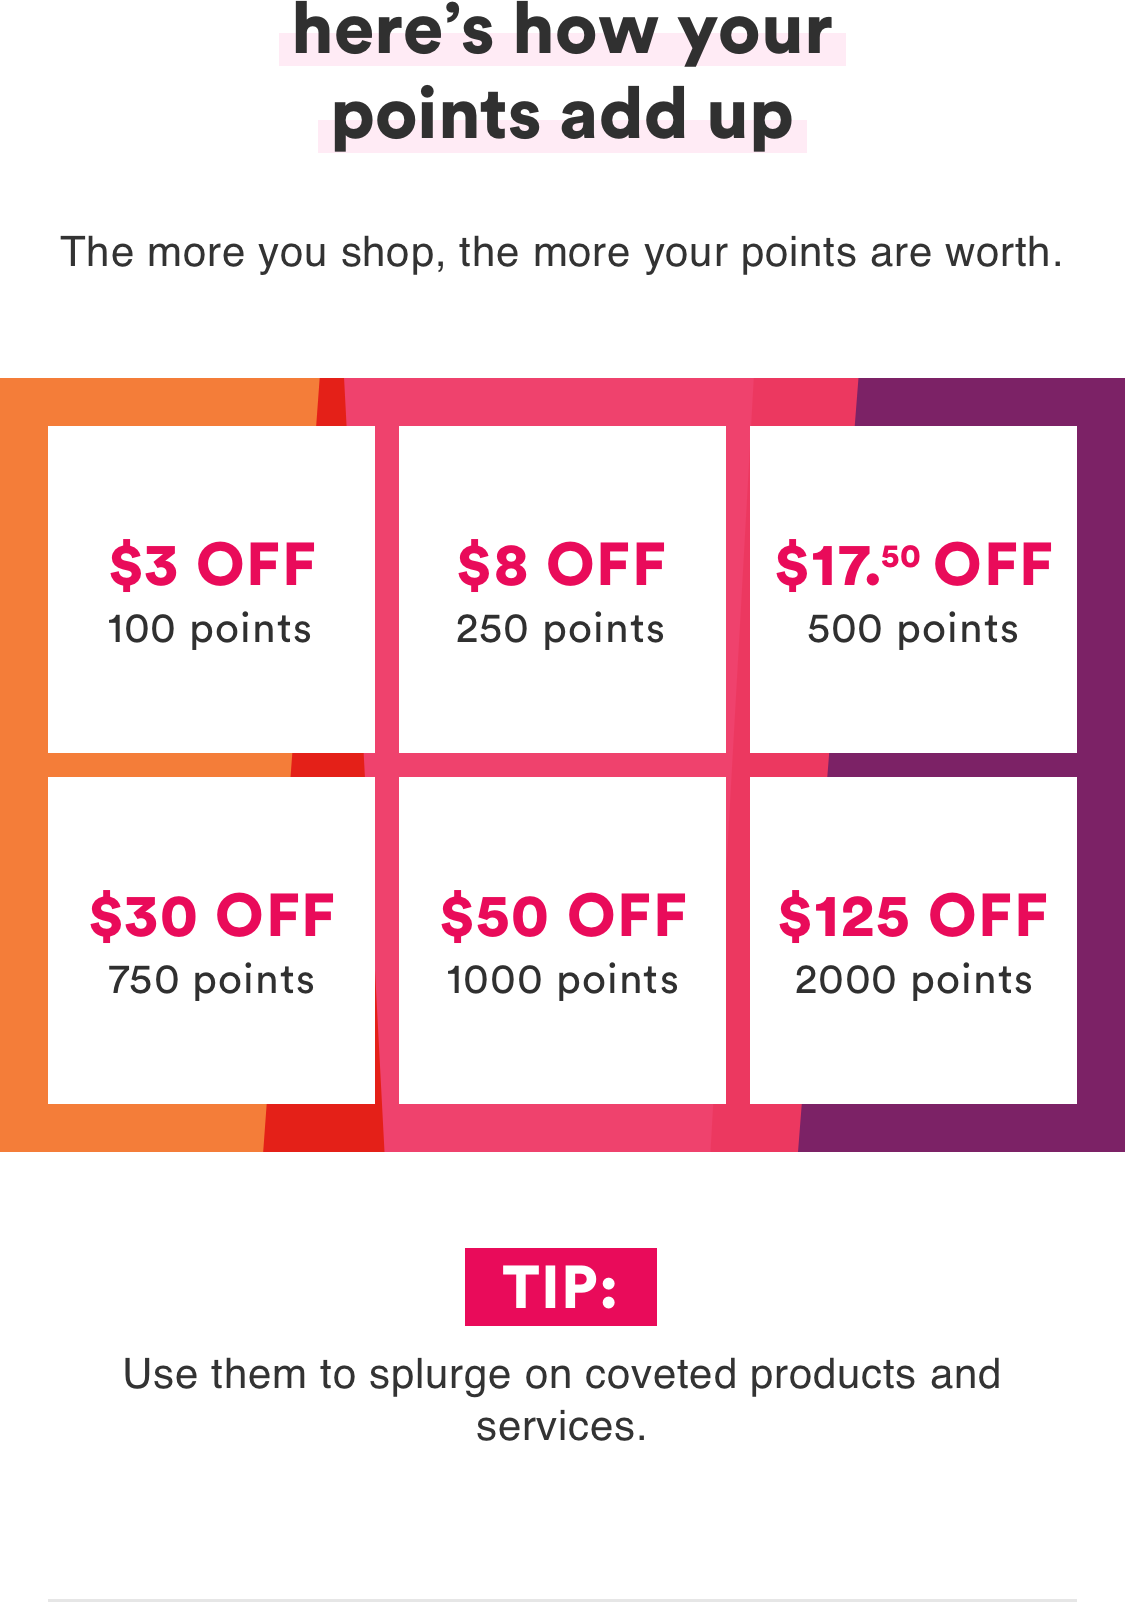 Cash in 100 points for $3 off; 500 for $17.50; 750 for $30; 1,000 for $50; and 2,000 for $125.